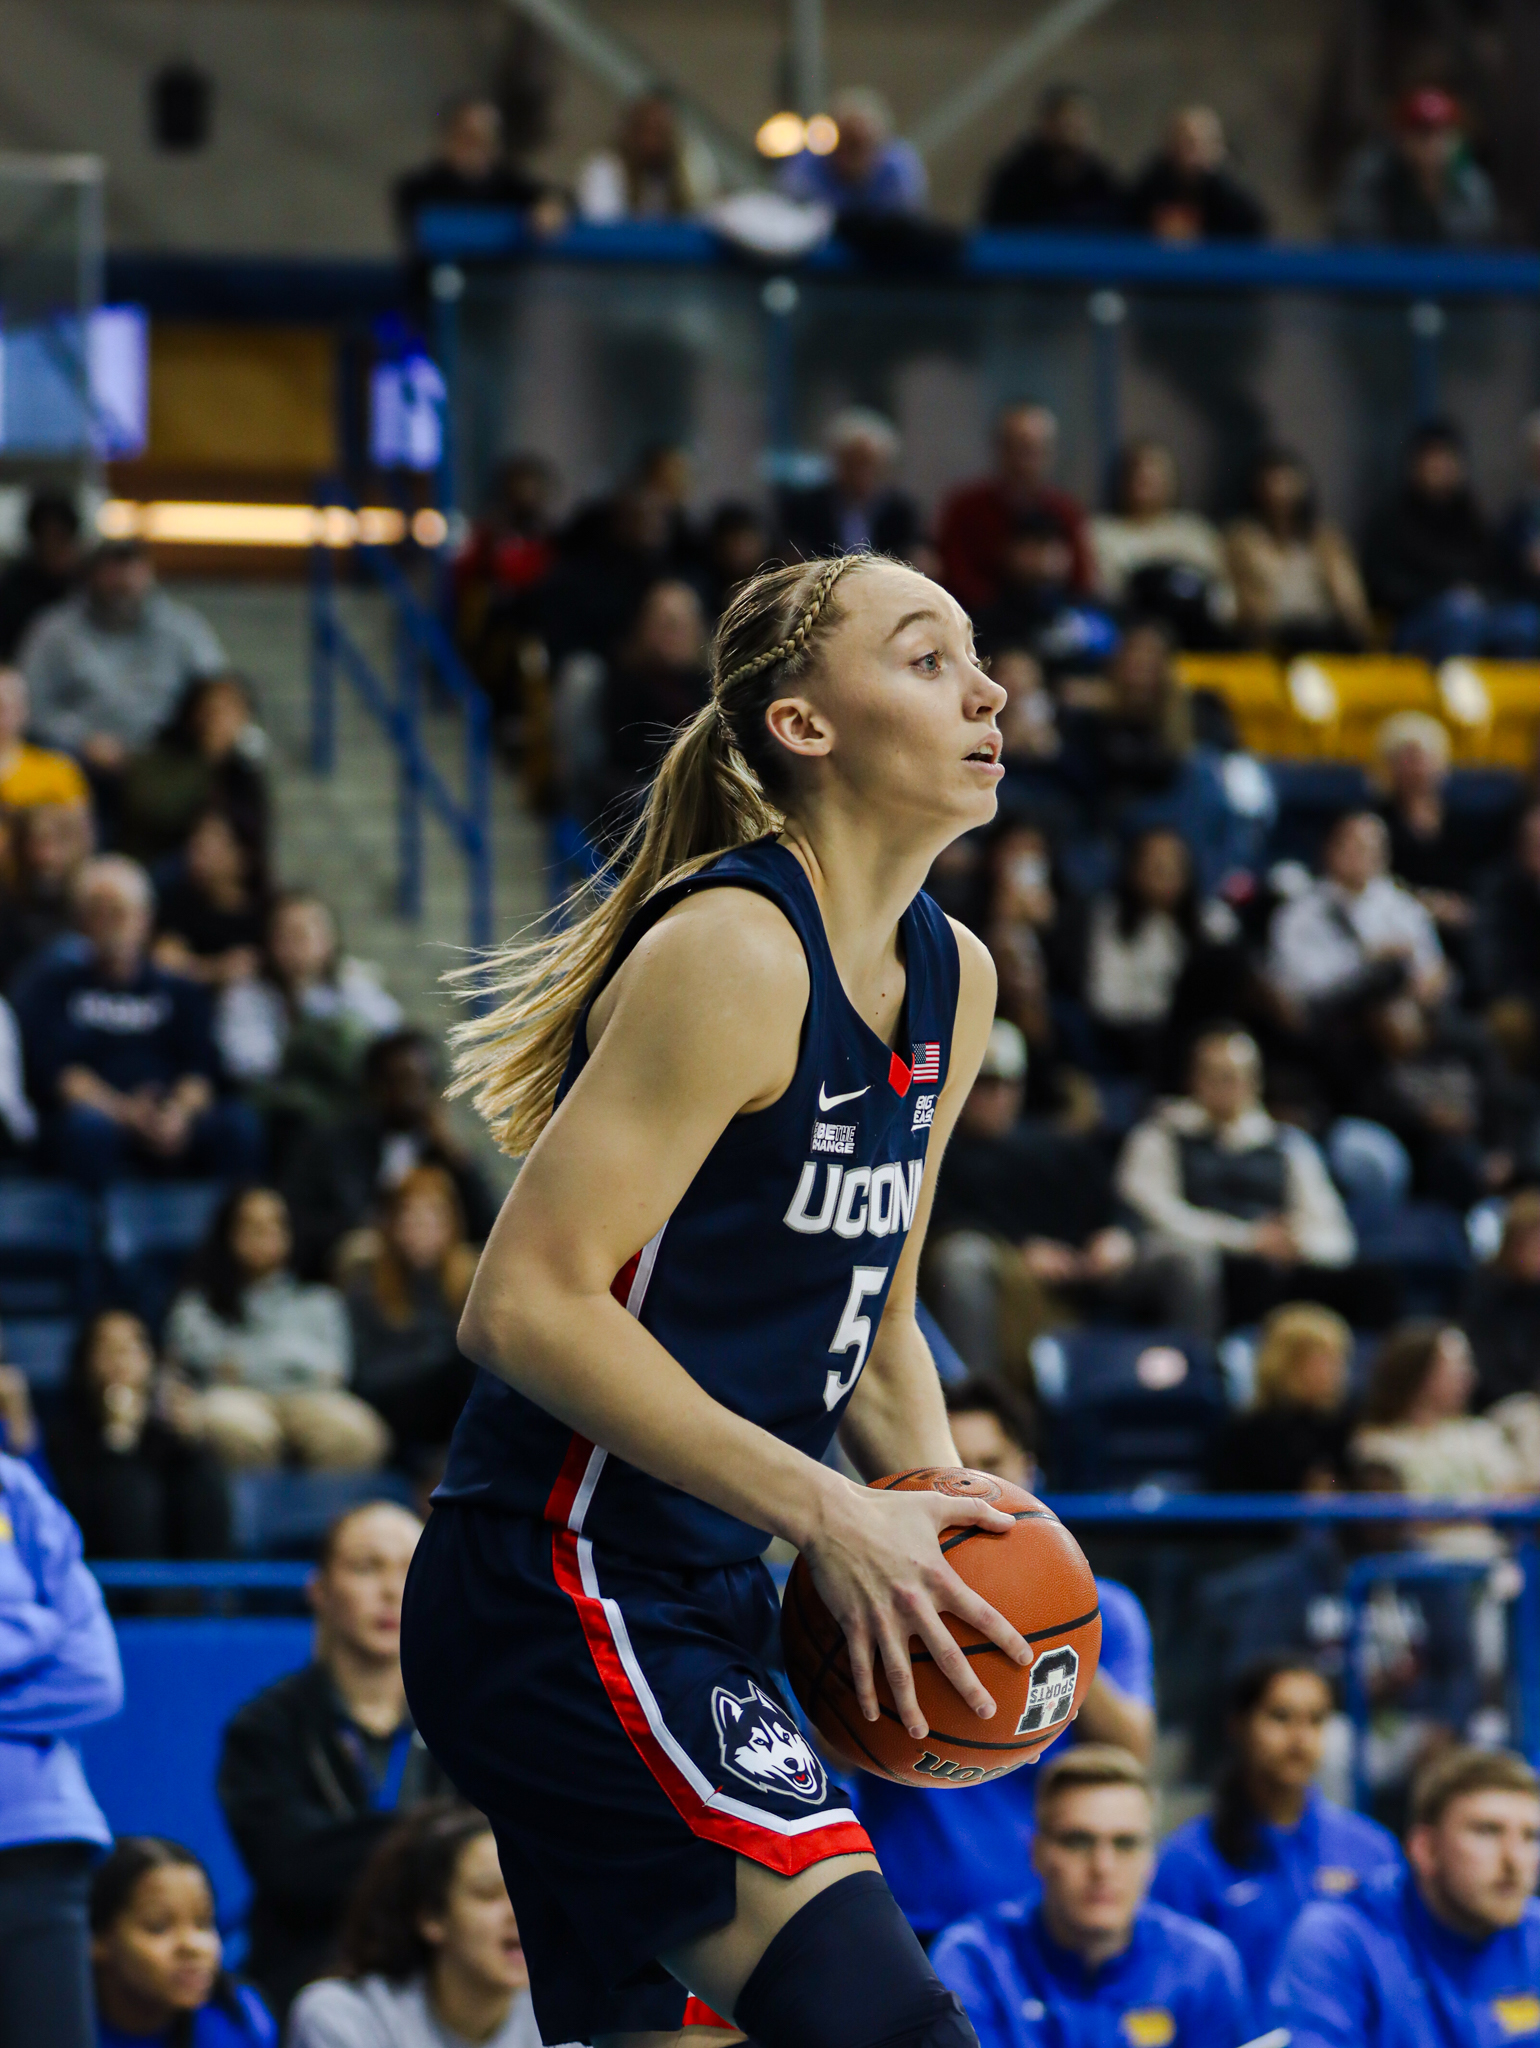 UConn Huskies player Paige Bueckers looks to pass the basketball